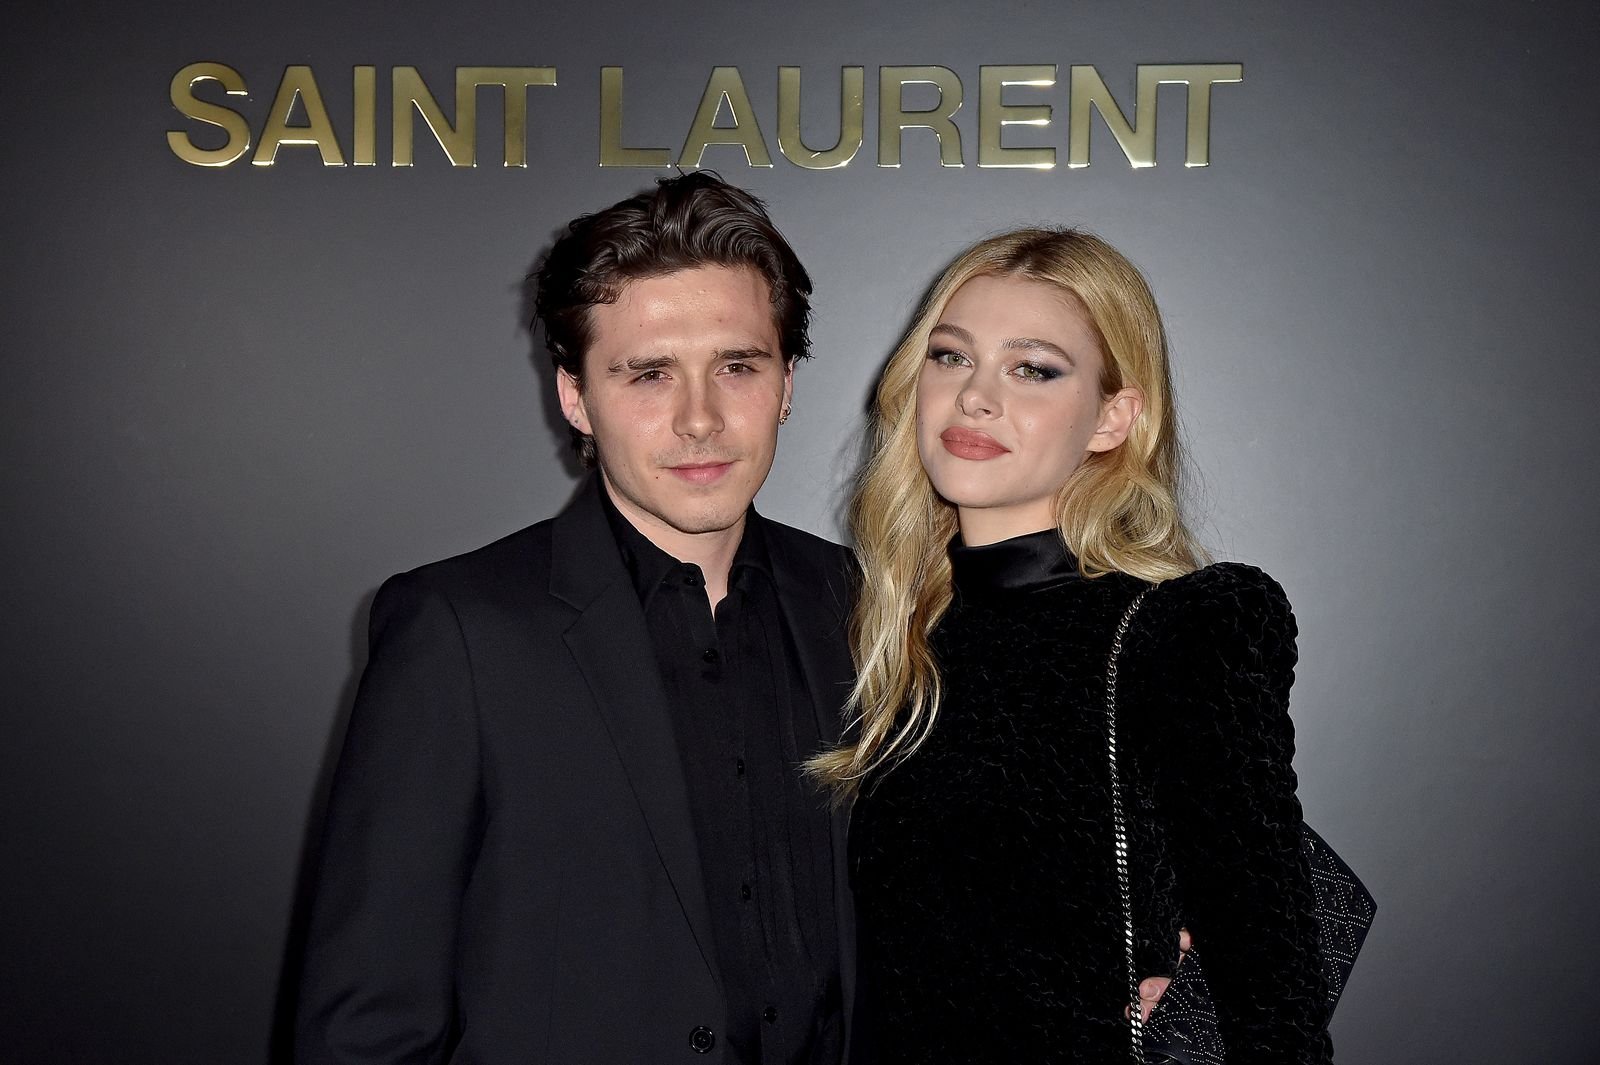 Brooklyn Beckham and Nicola Peltz at a Saint Laurent show for Paris Fashion Week's Womenswear Fall/Winter 2020/2021 on February 25, 2020, in France | Photo: Dominique Charriau/WireImage/Getty Images